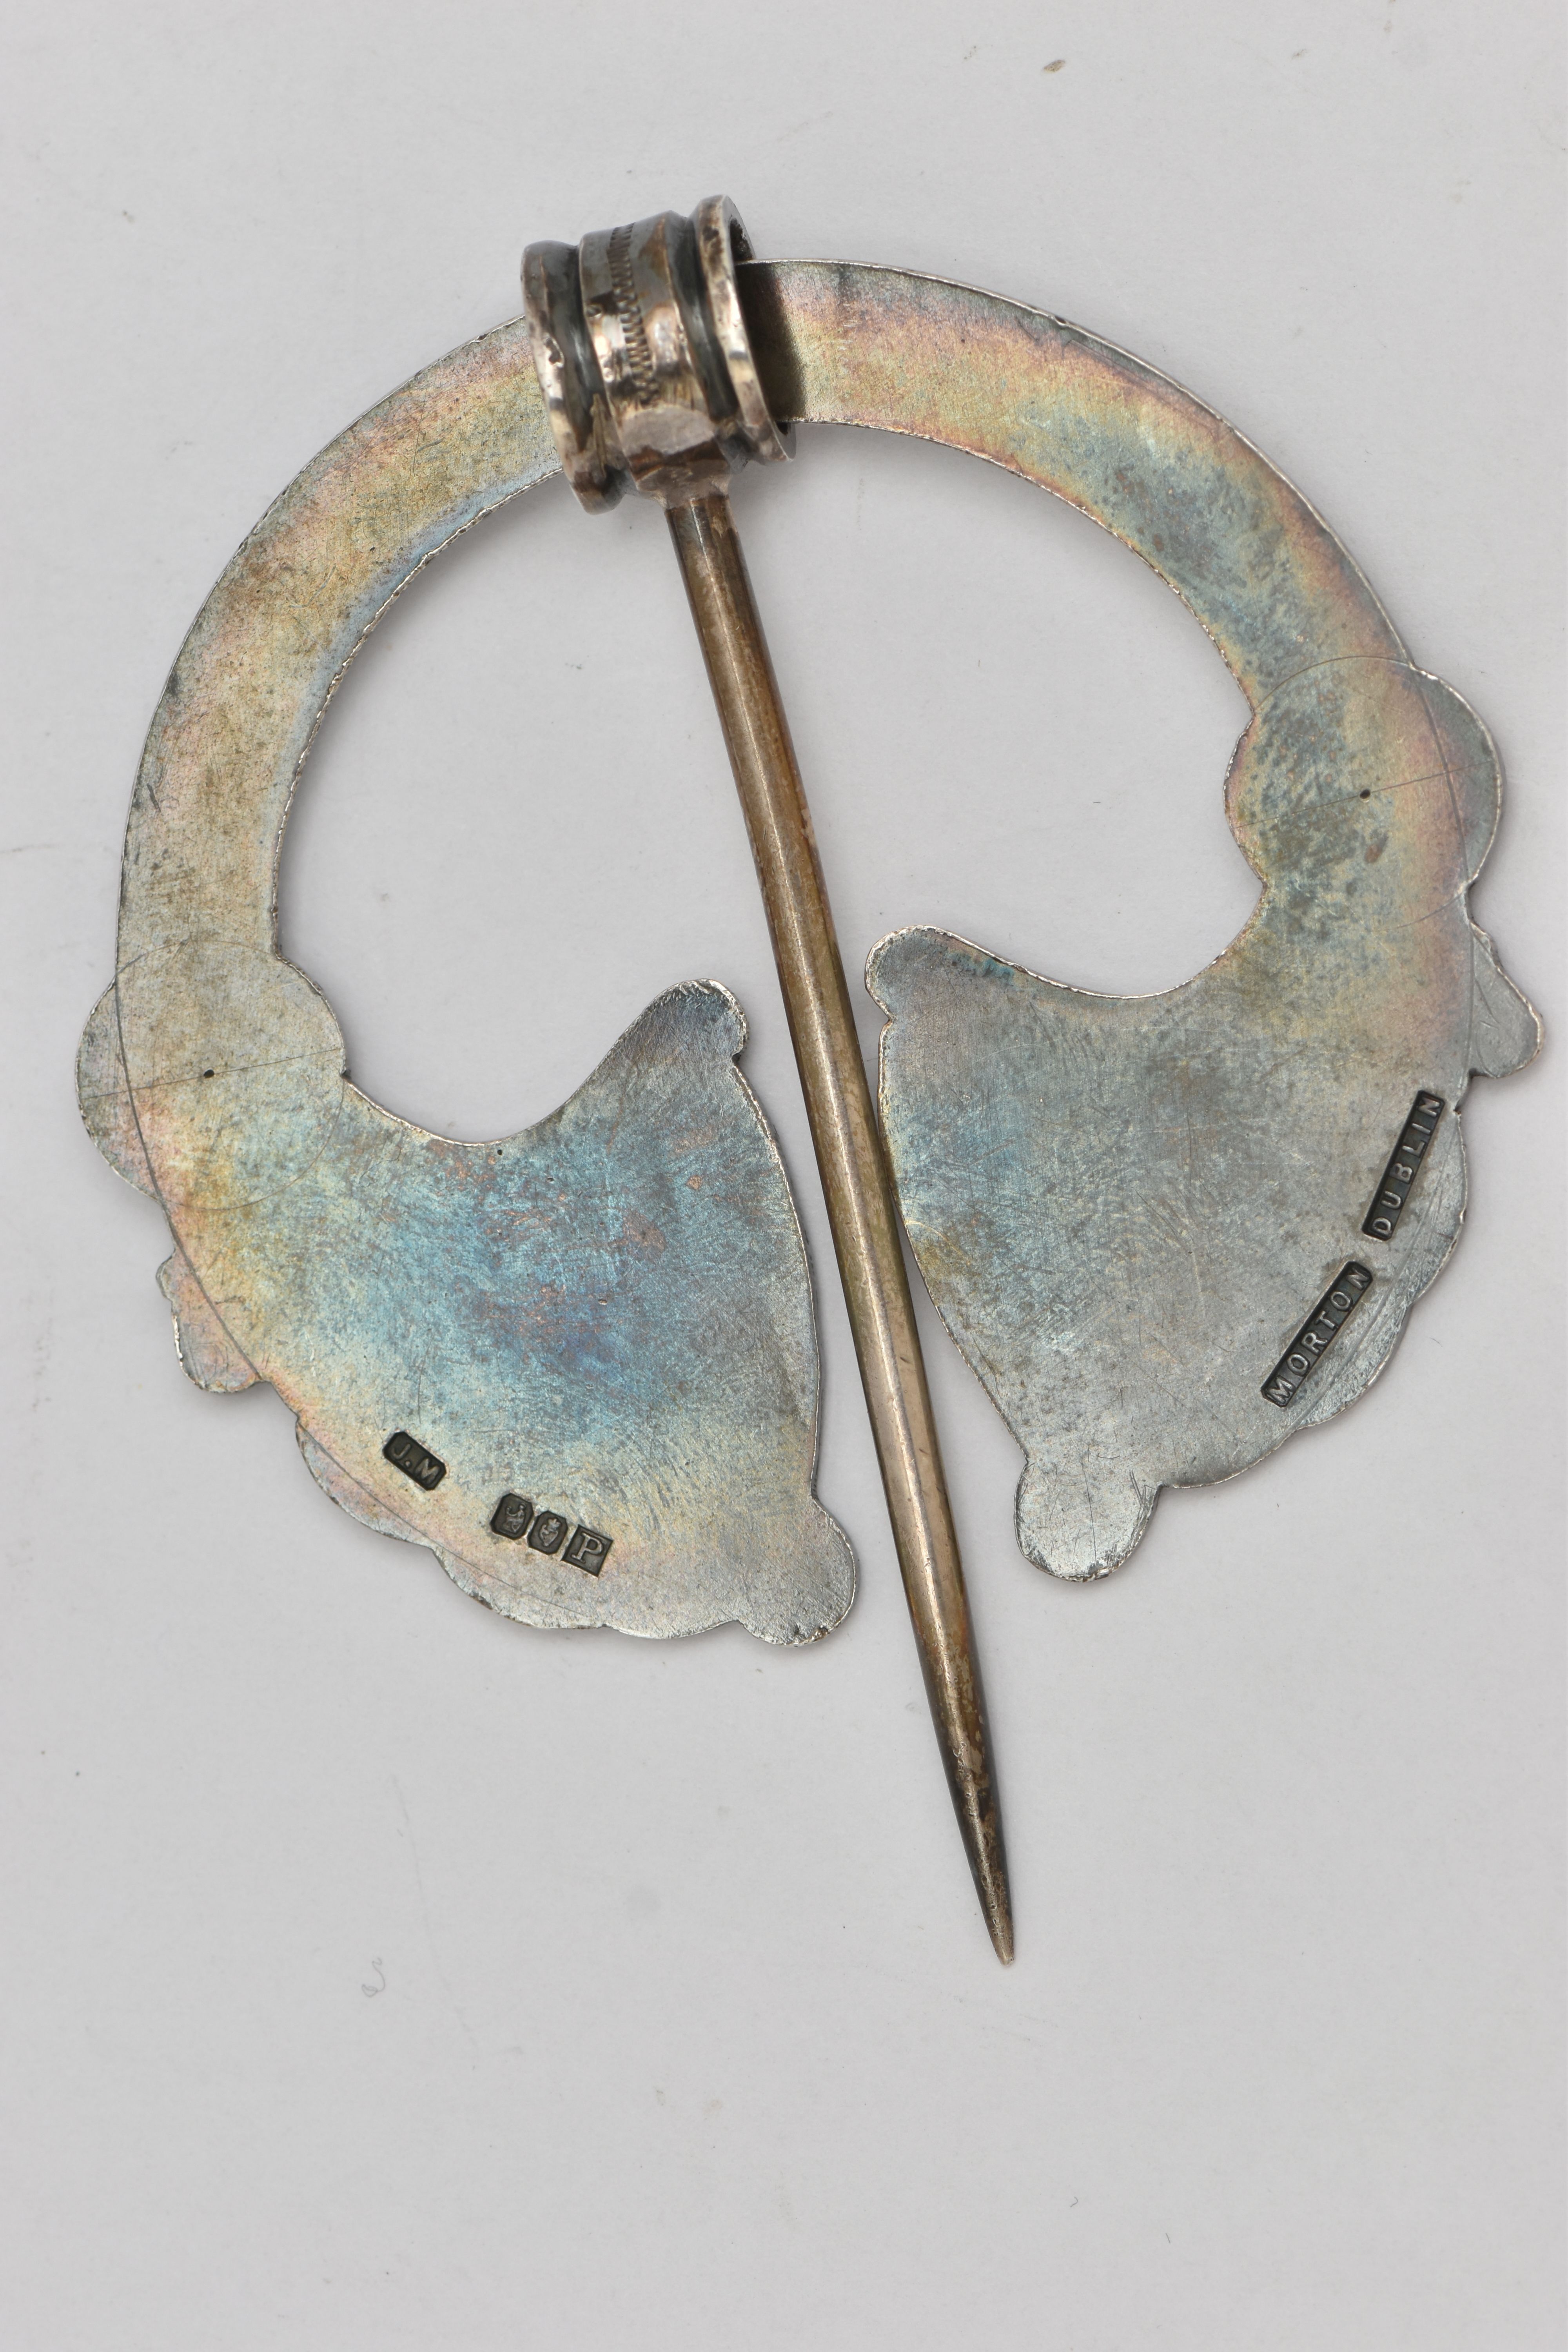 AN IRISH SILVER PENANNULAR CELTIC BROOCH, designed as two harps with yellow metal embellishments, - Image 2 of 2